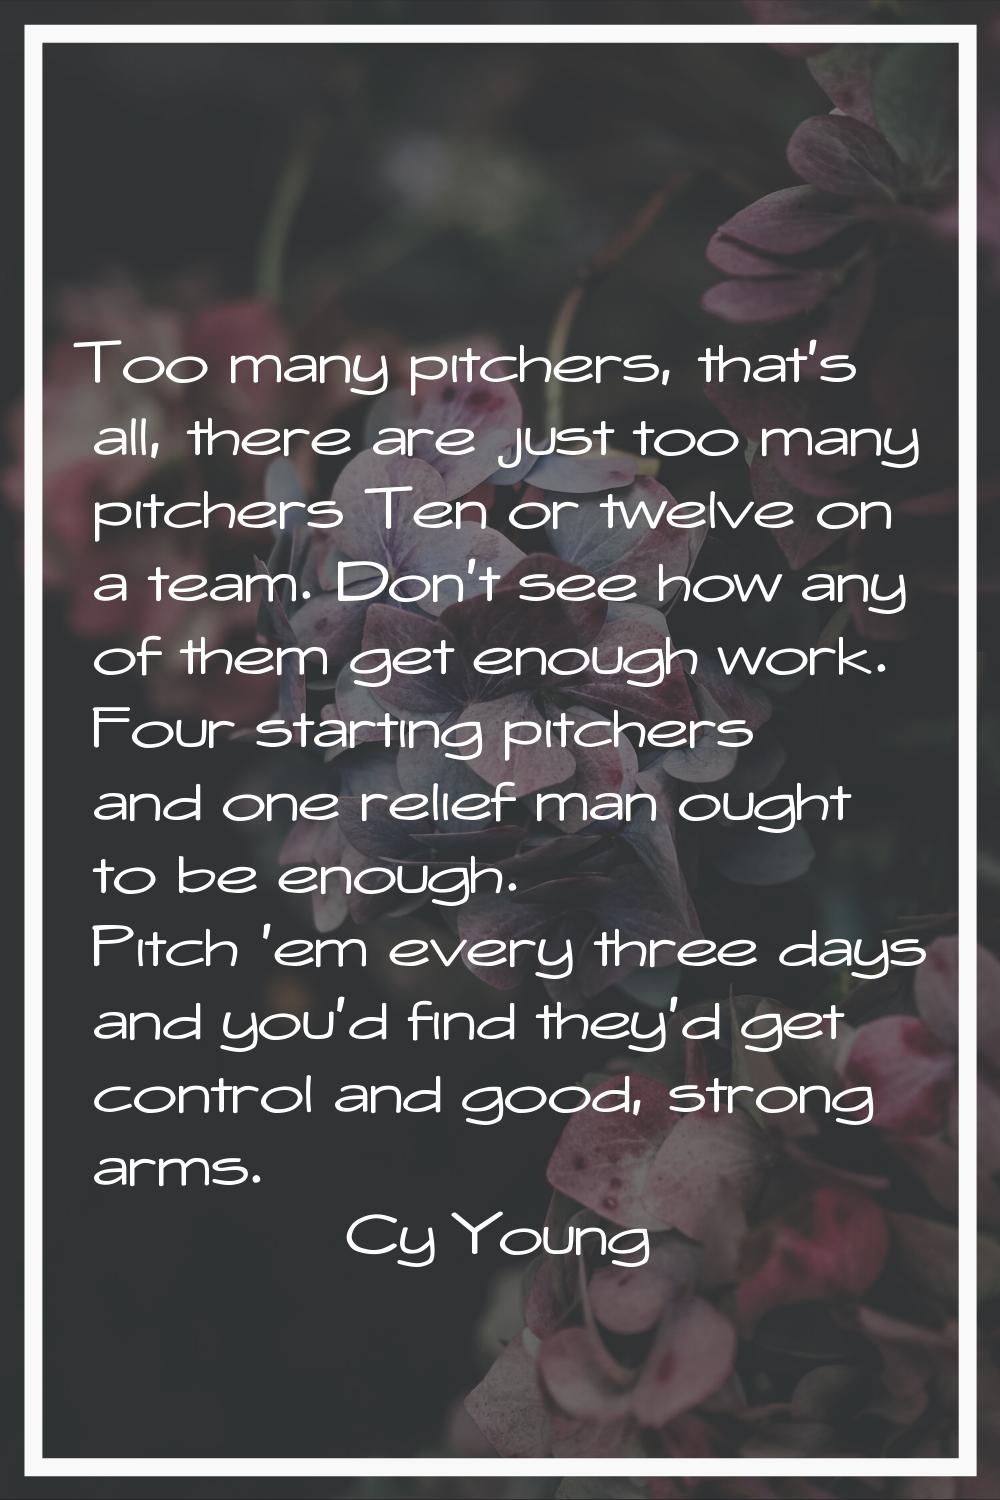 Too many pitchers, that's all, there are just too many pitchers Ten or twelve on a team. Don't see 